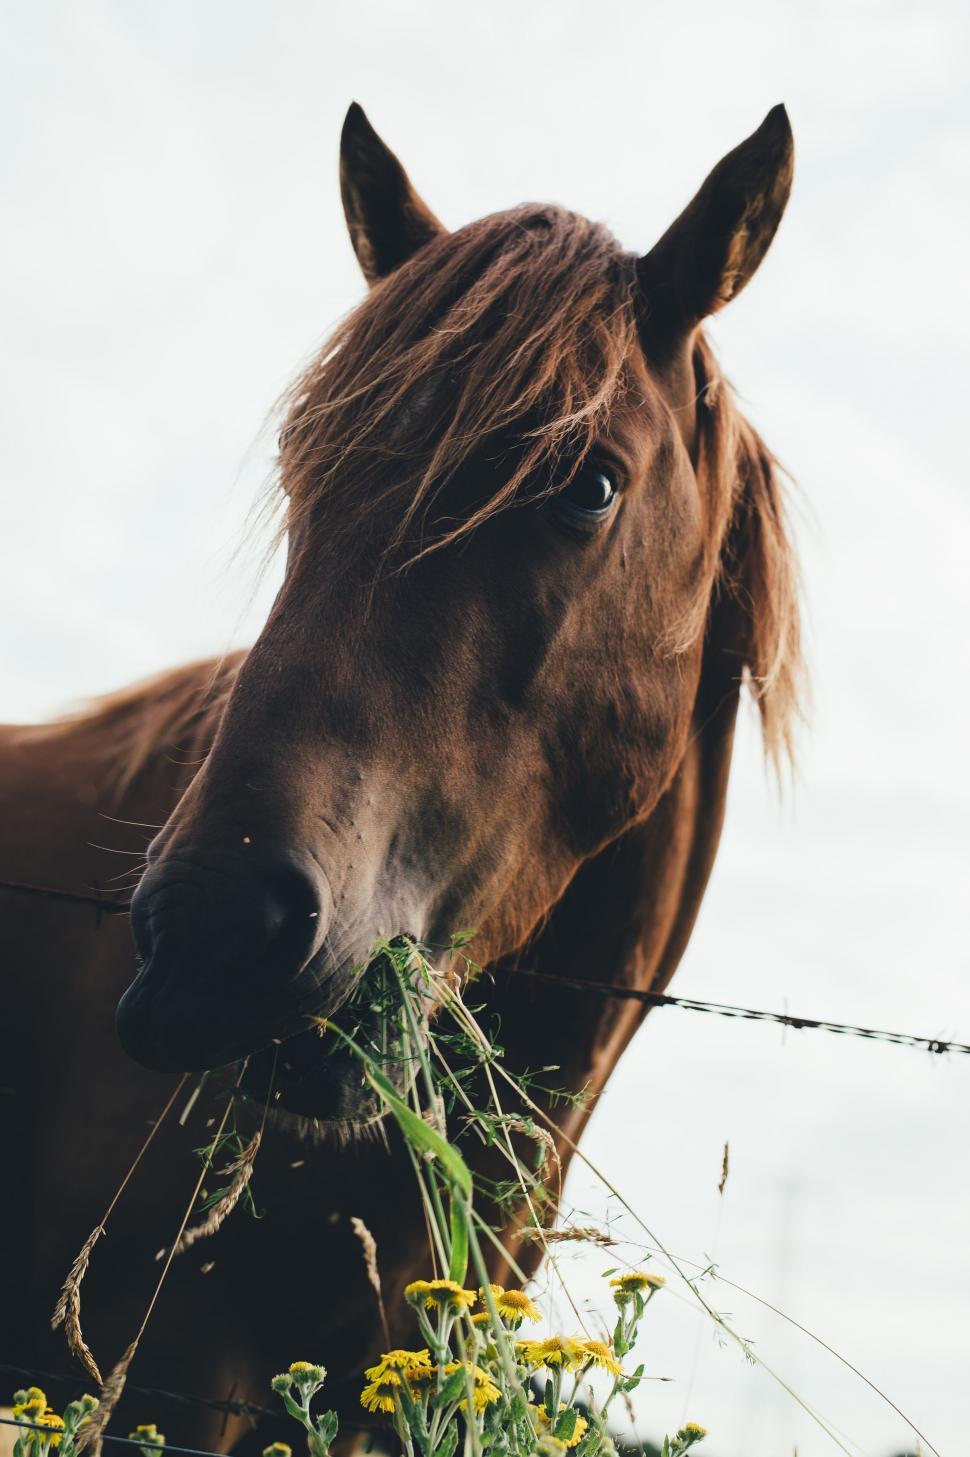 Free Image of Brown Horse Standing Next to Barbed Wire Fence 